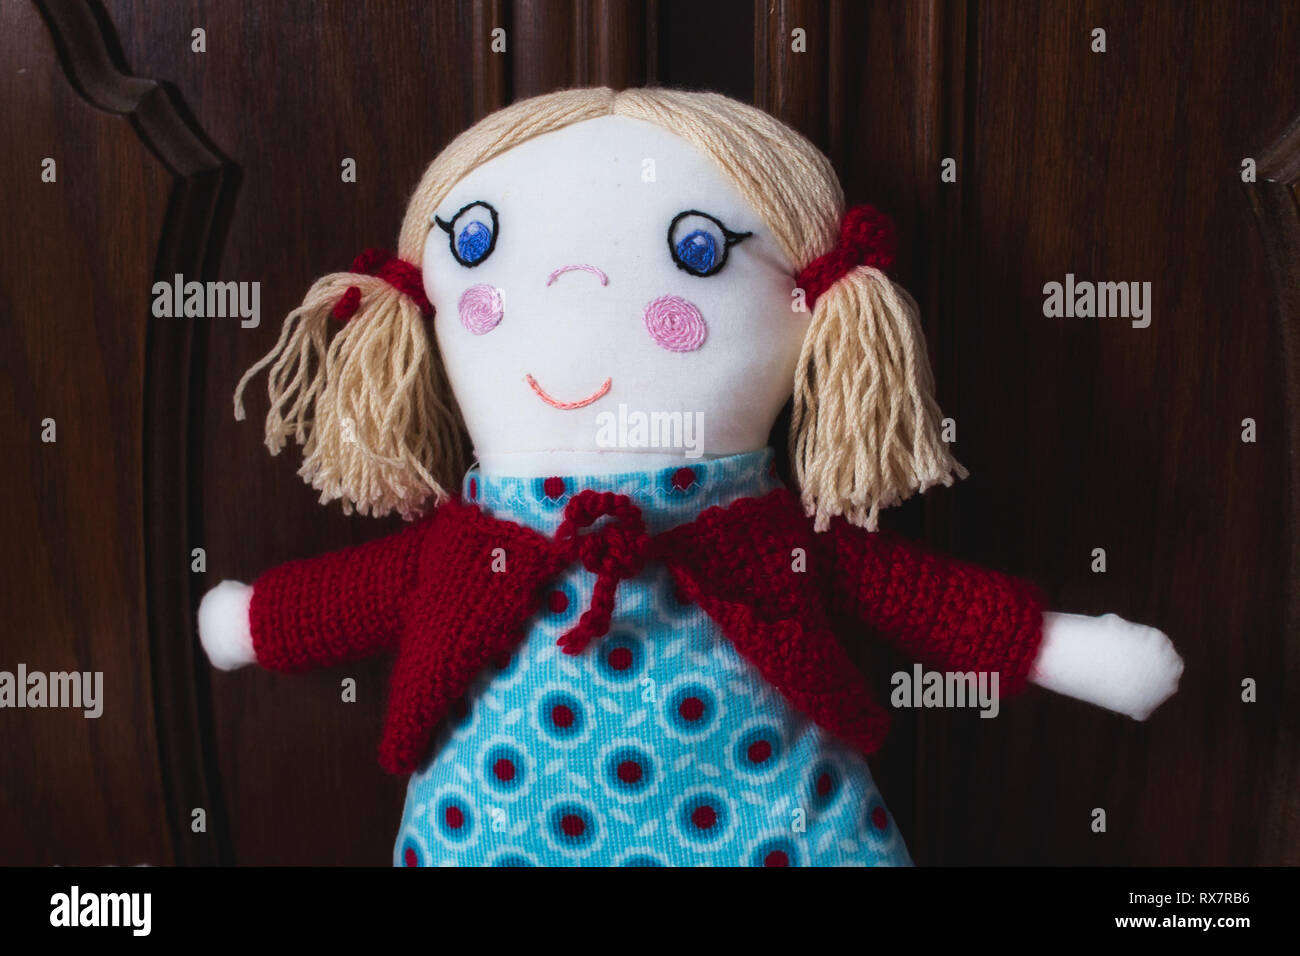 Closeup of knitted stuffed rag doll soft toy for a child Stock Photo